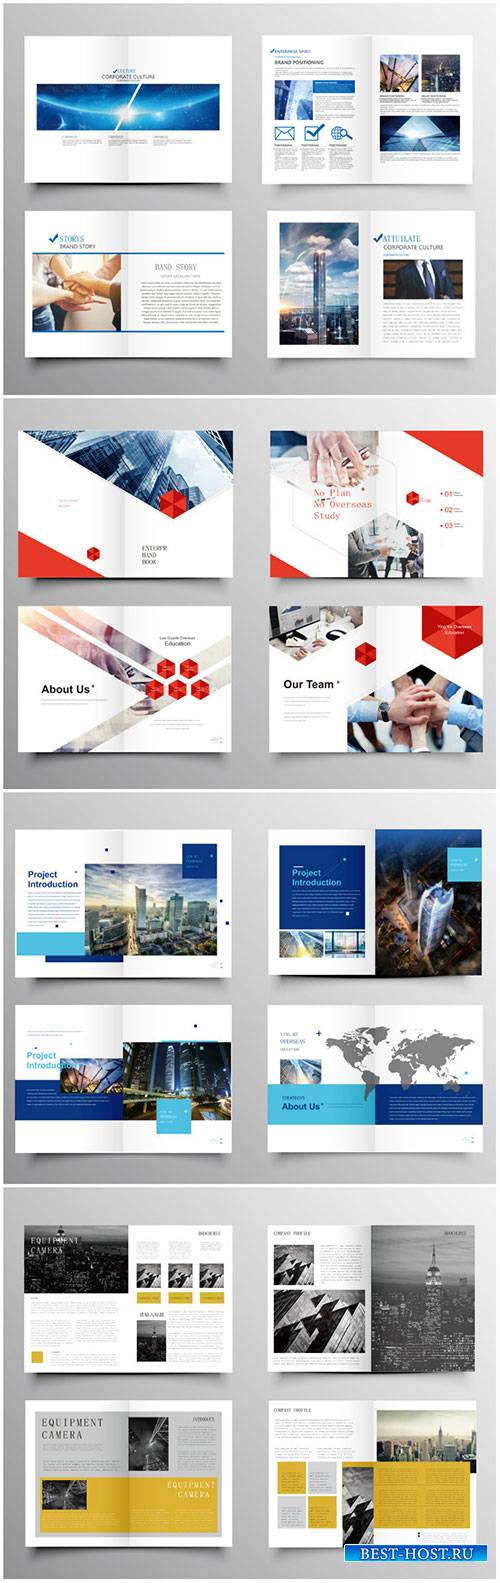 Brochure template vector layout design, corporate business annual report, magazine, flyer mockup # 226